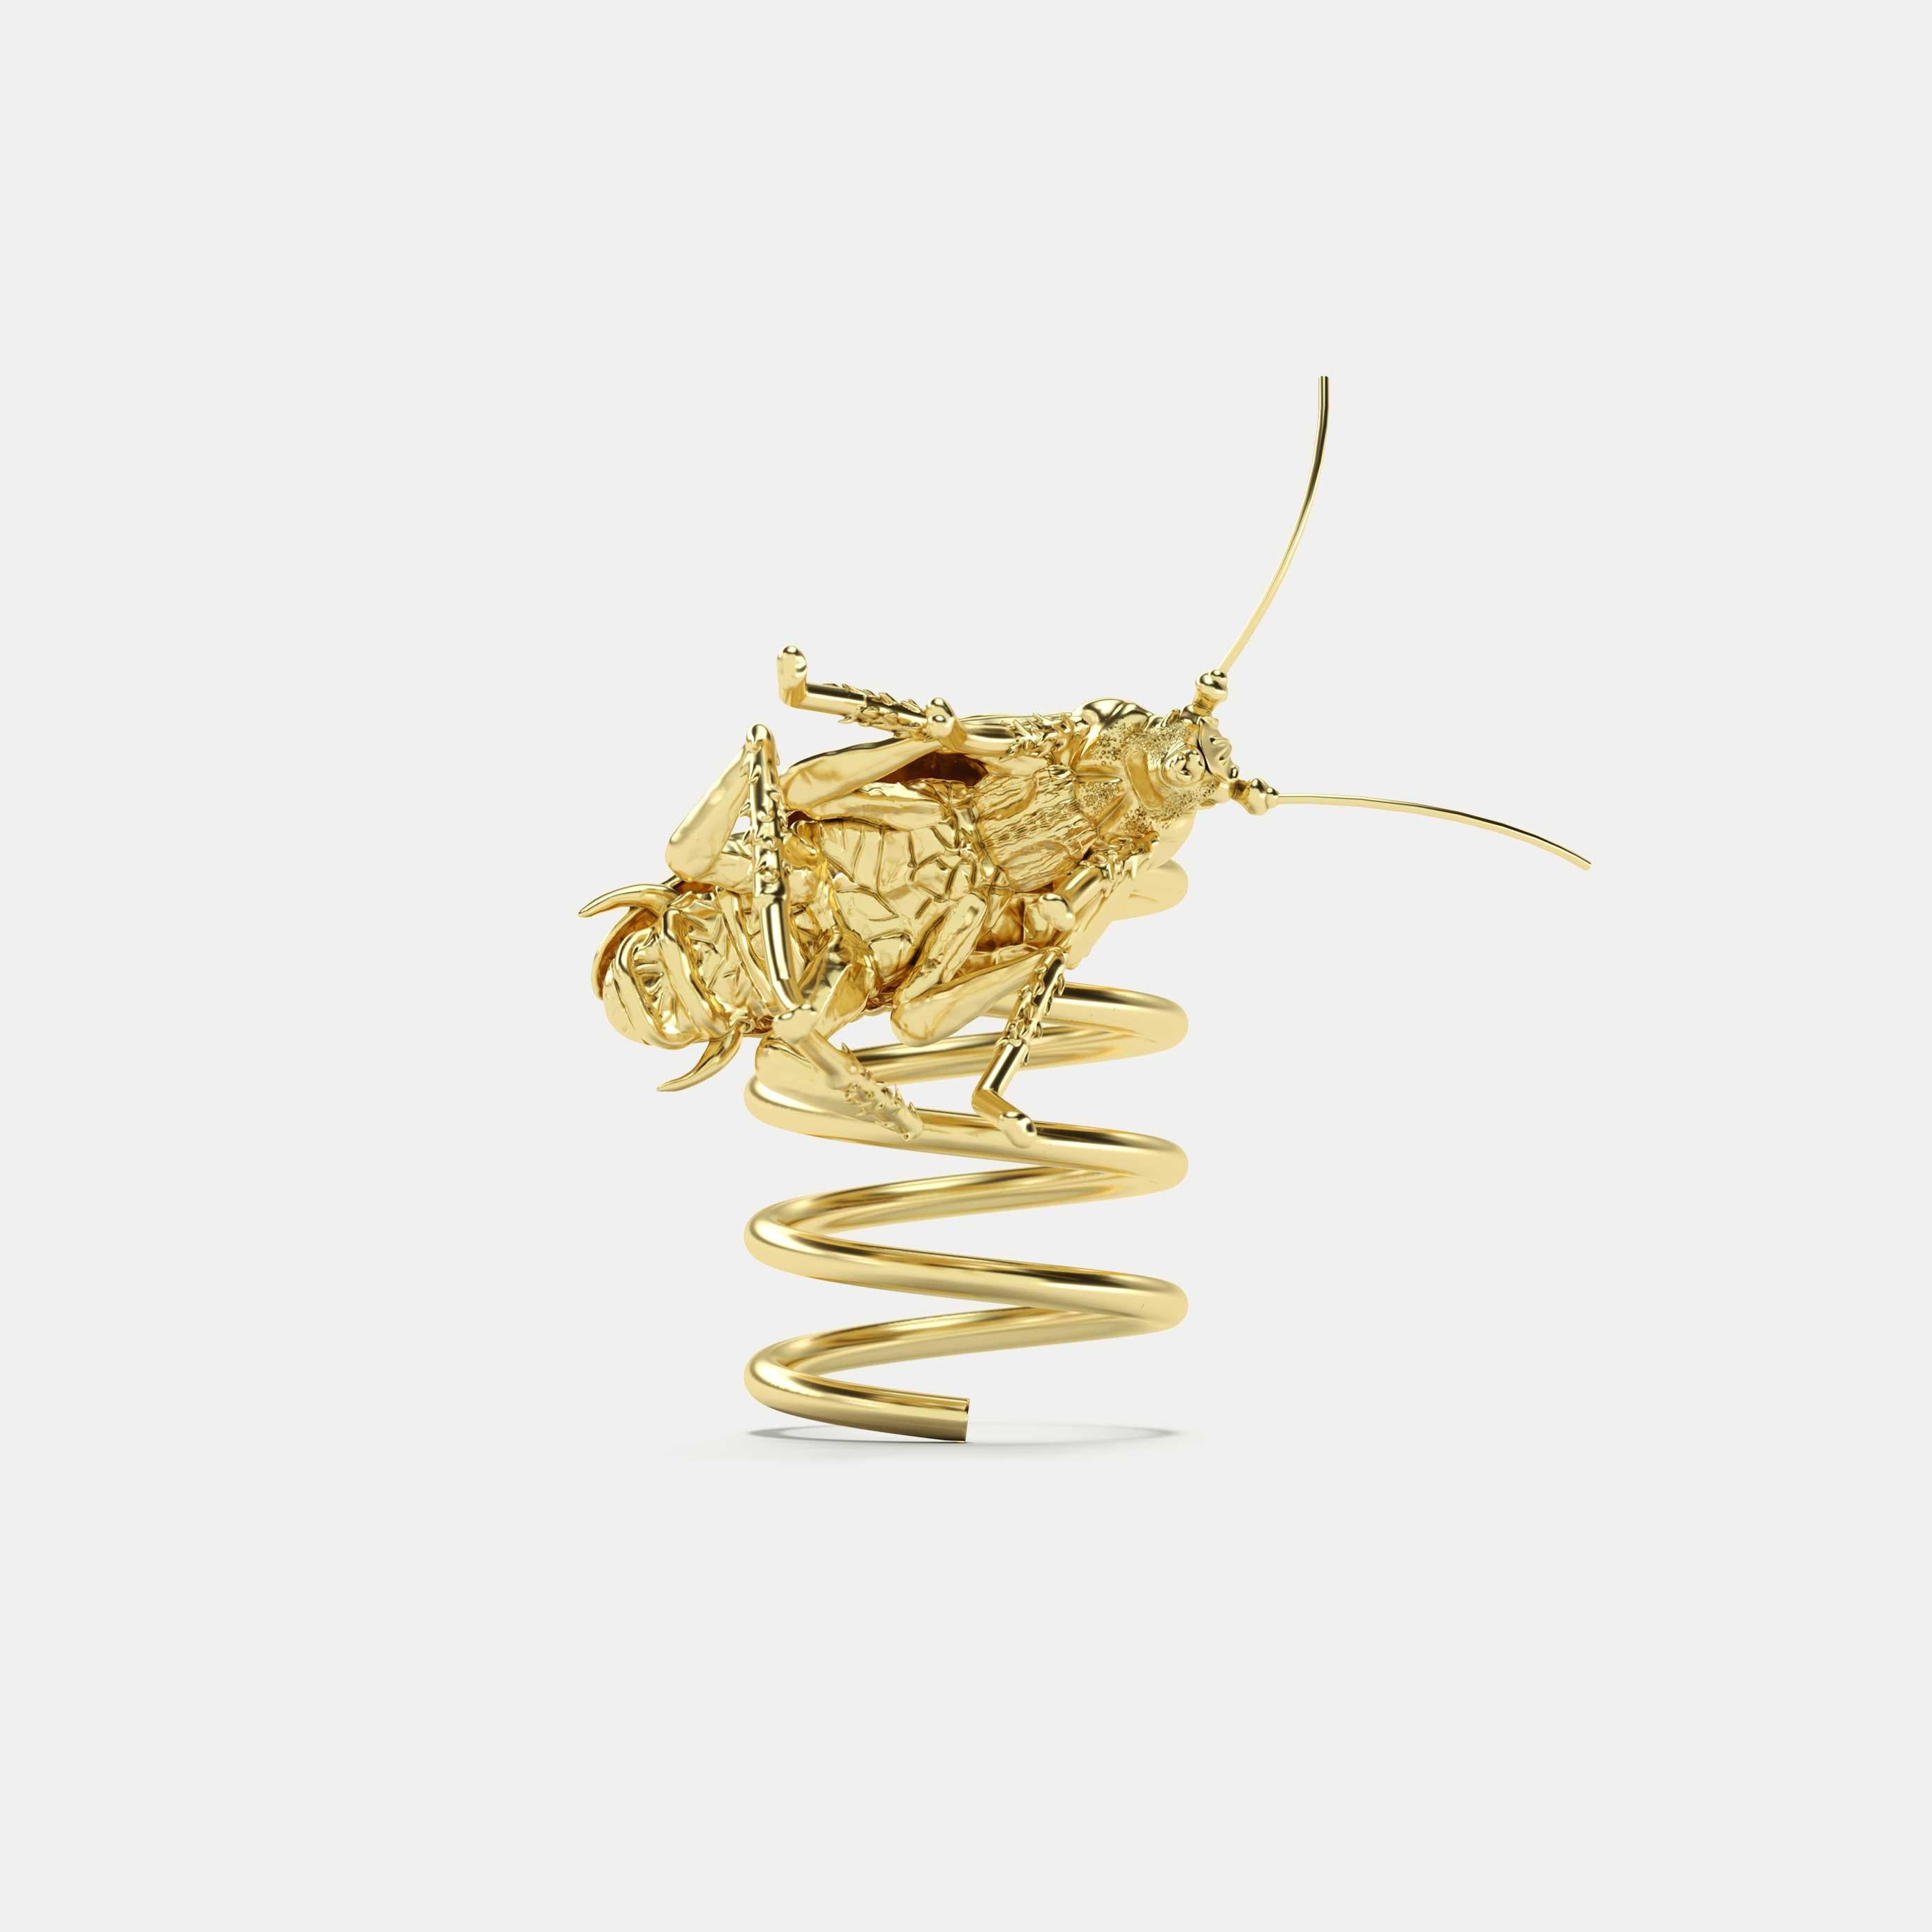 Golden Elastic Spiral Ring with Mambo Cockroach, 18k Yellow Gold.

ECH JEWELRY, Ode to the Revolution in Fine Jewelry!  
For everyday wear, the owner can easily remove the Cockroach using a special screwdriver that goes together with the ring.
This